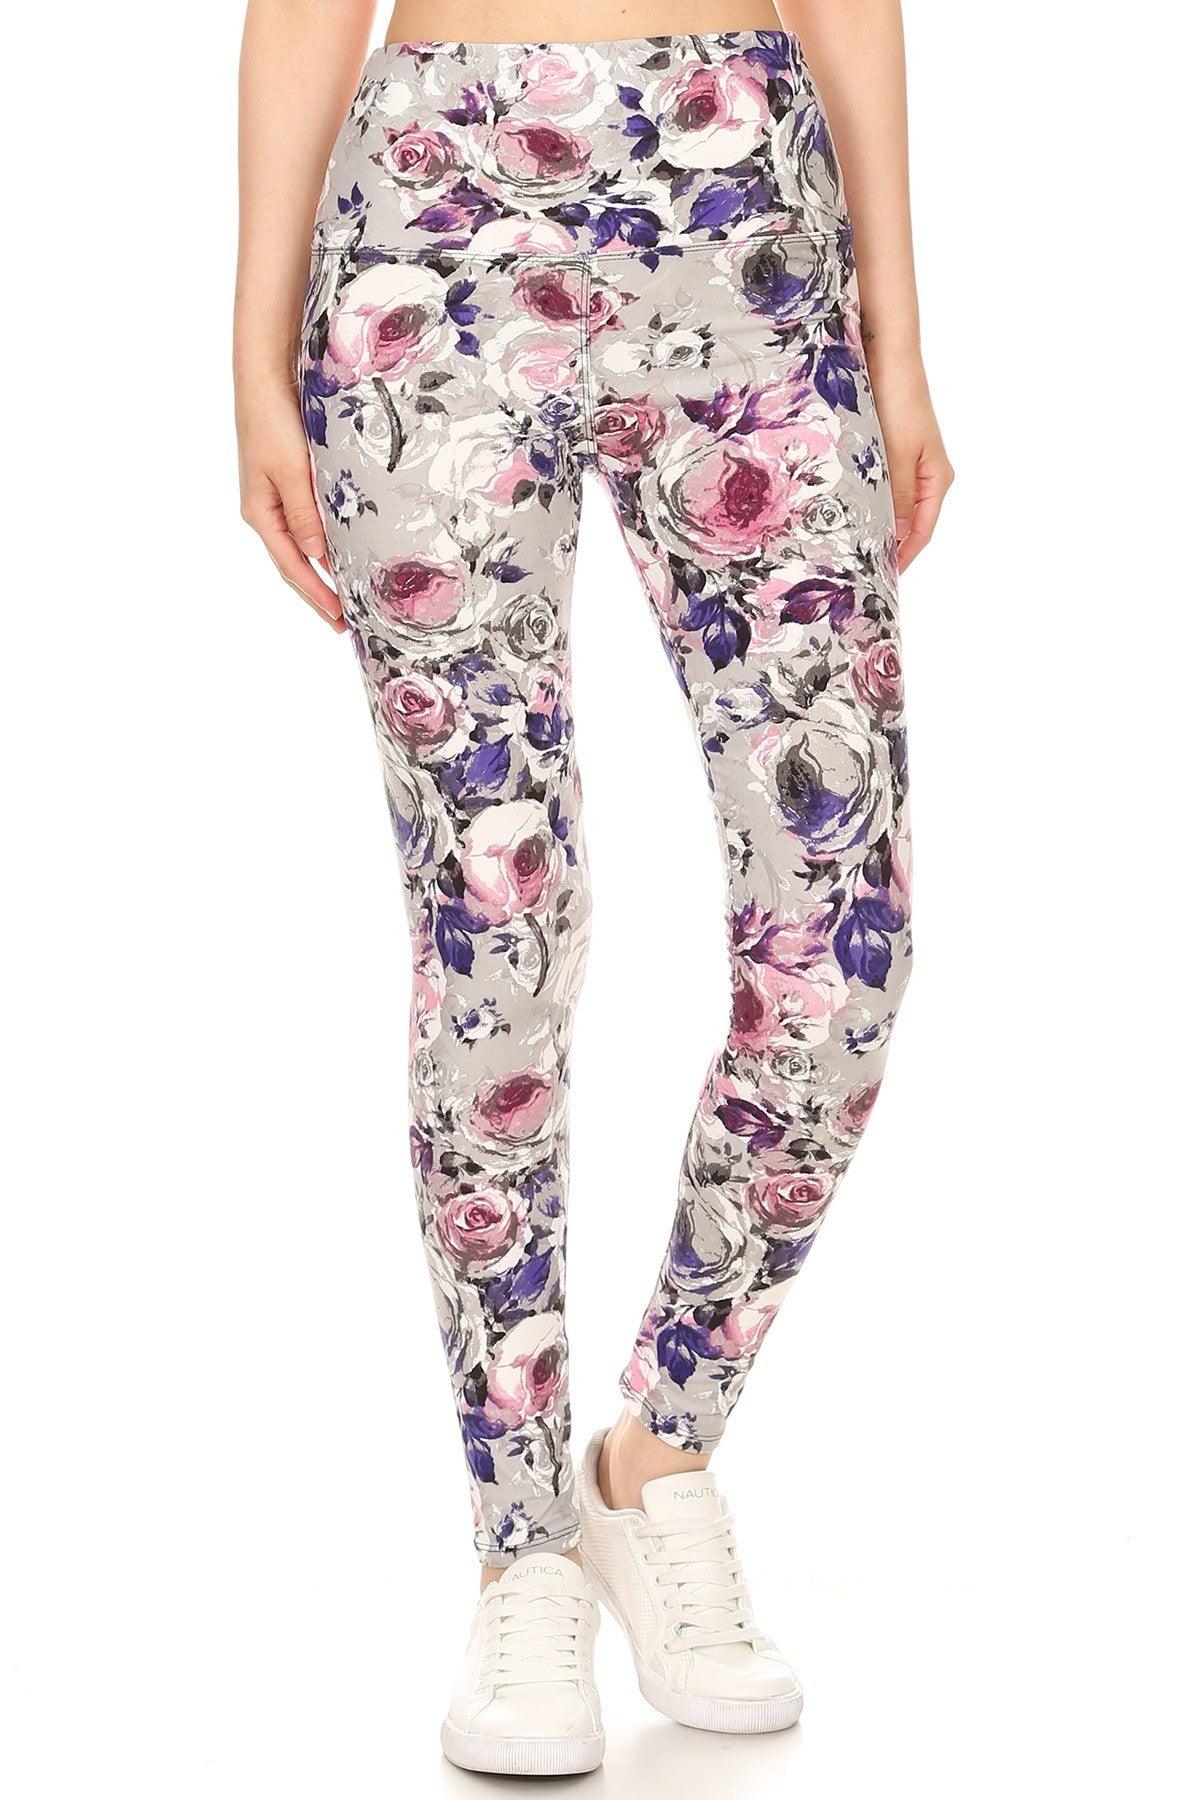 5-inch Long Yoga Style Banded Lined Floral Printed Knit Legging With High Waist Naughty Smile Fashion